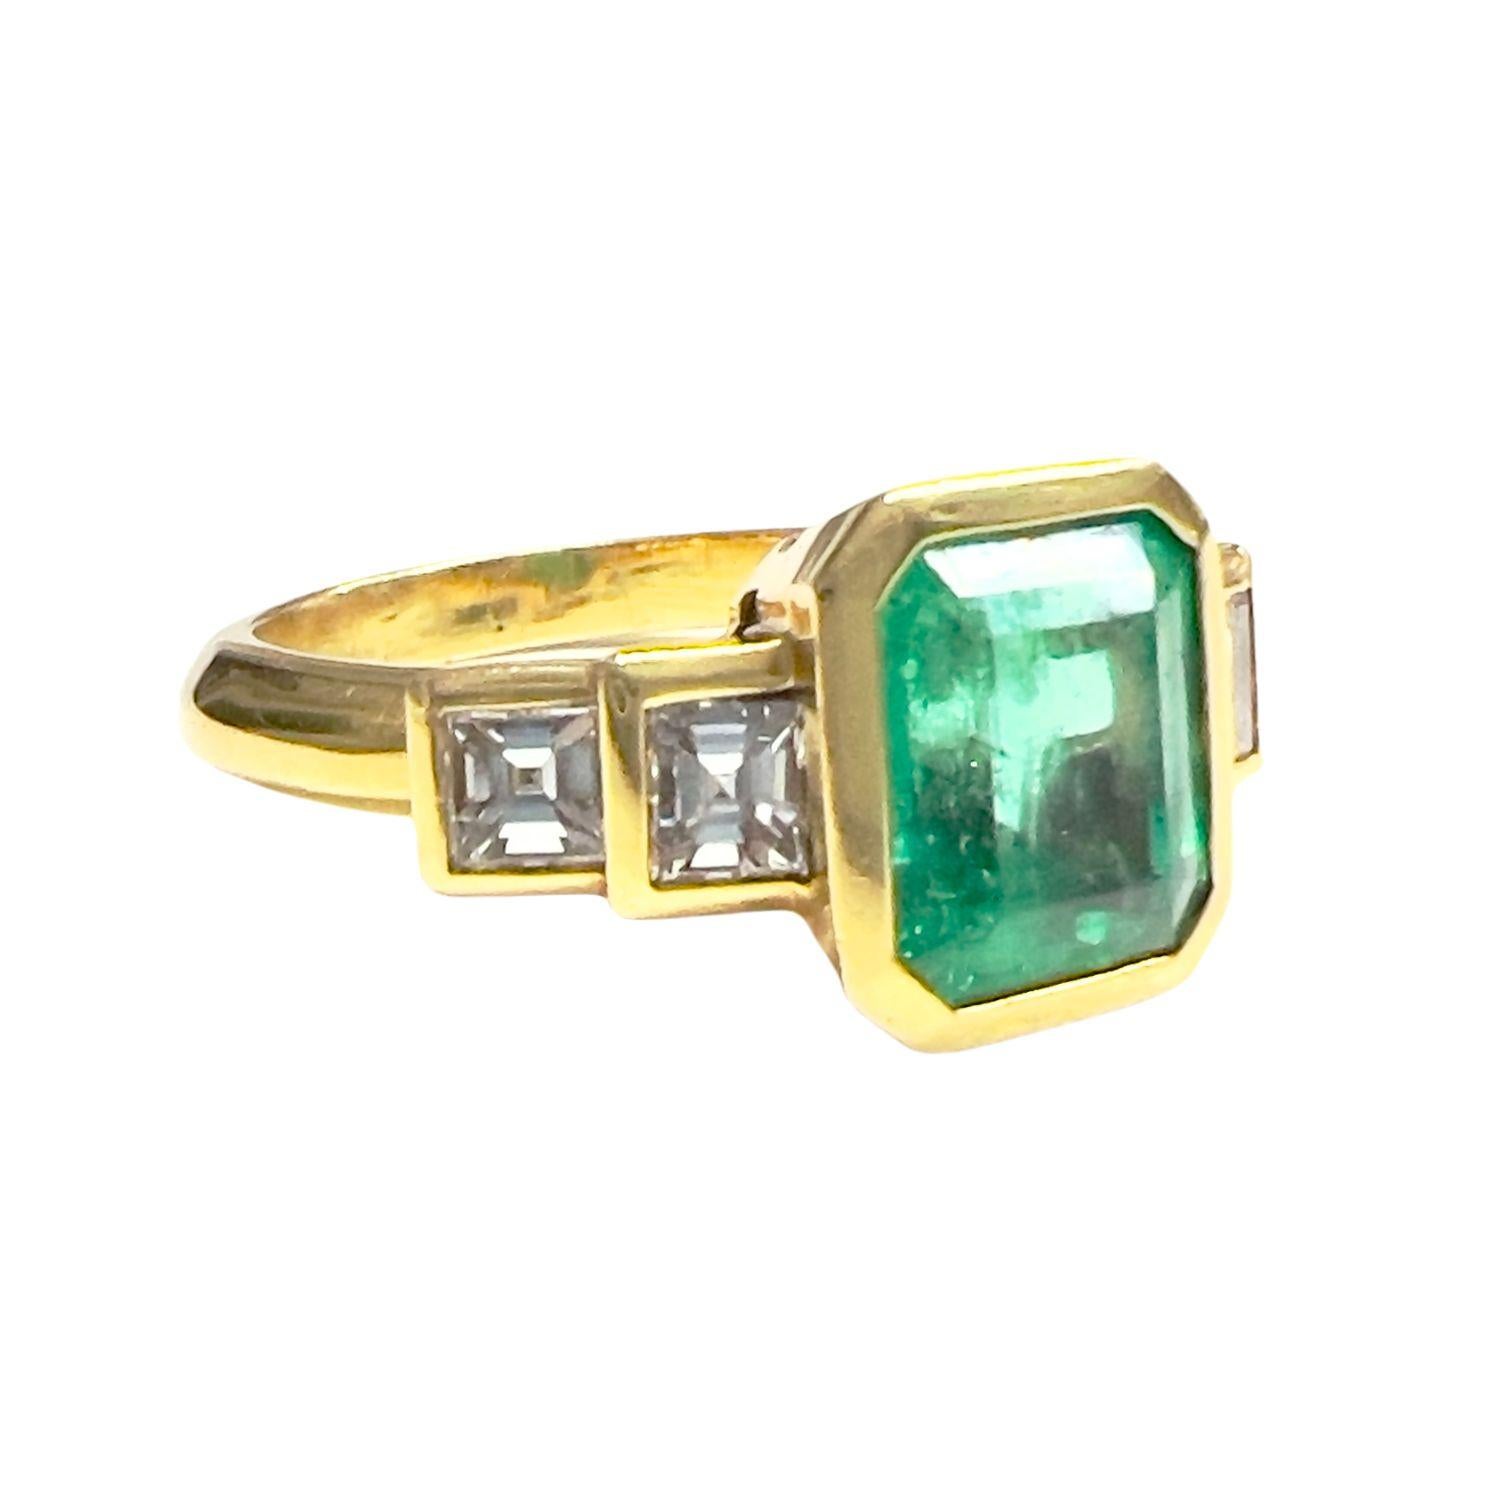 Contemporary 20th Century 18k yellow gold ring with emerald center and diamonds.
Weight: 7.40 grams 
Size: 14/54 (resizable)
Gemological description:
•	Emerald center with emerald cut, weighing 2.50 ct / Triple A purity Emerald. Origin: